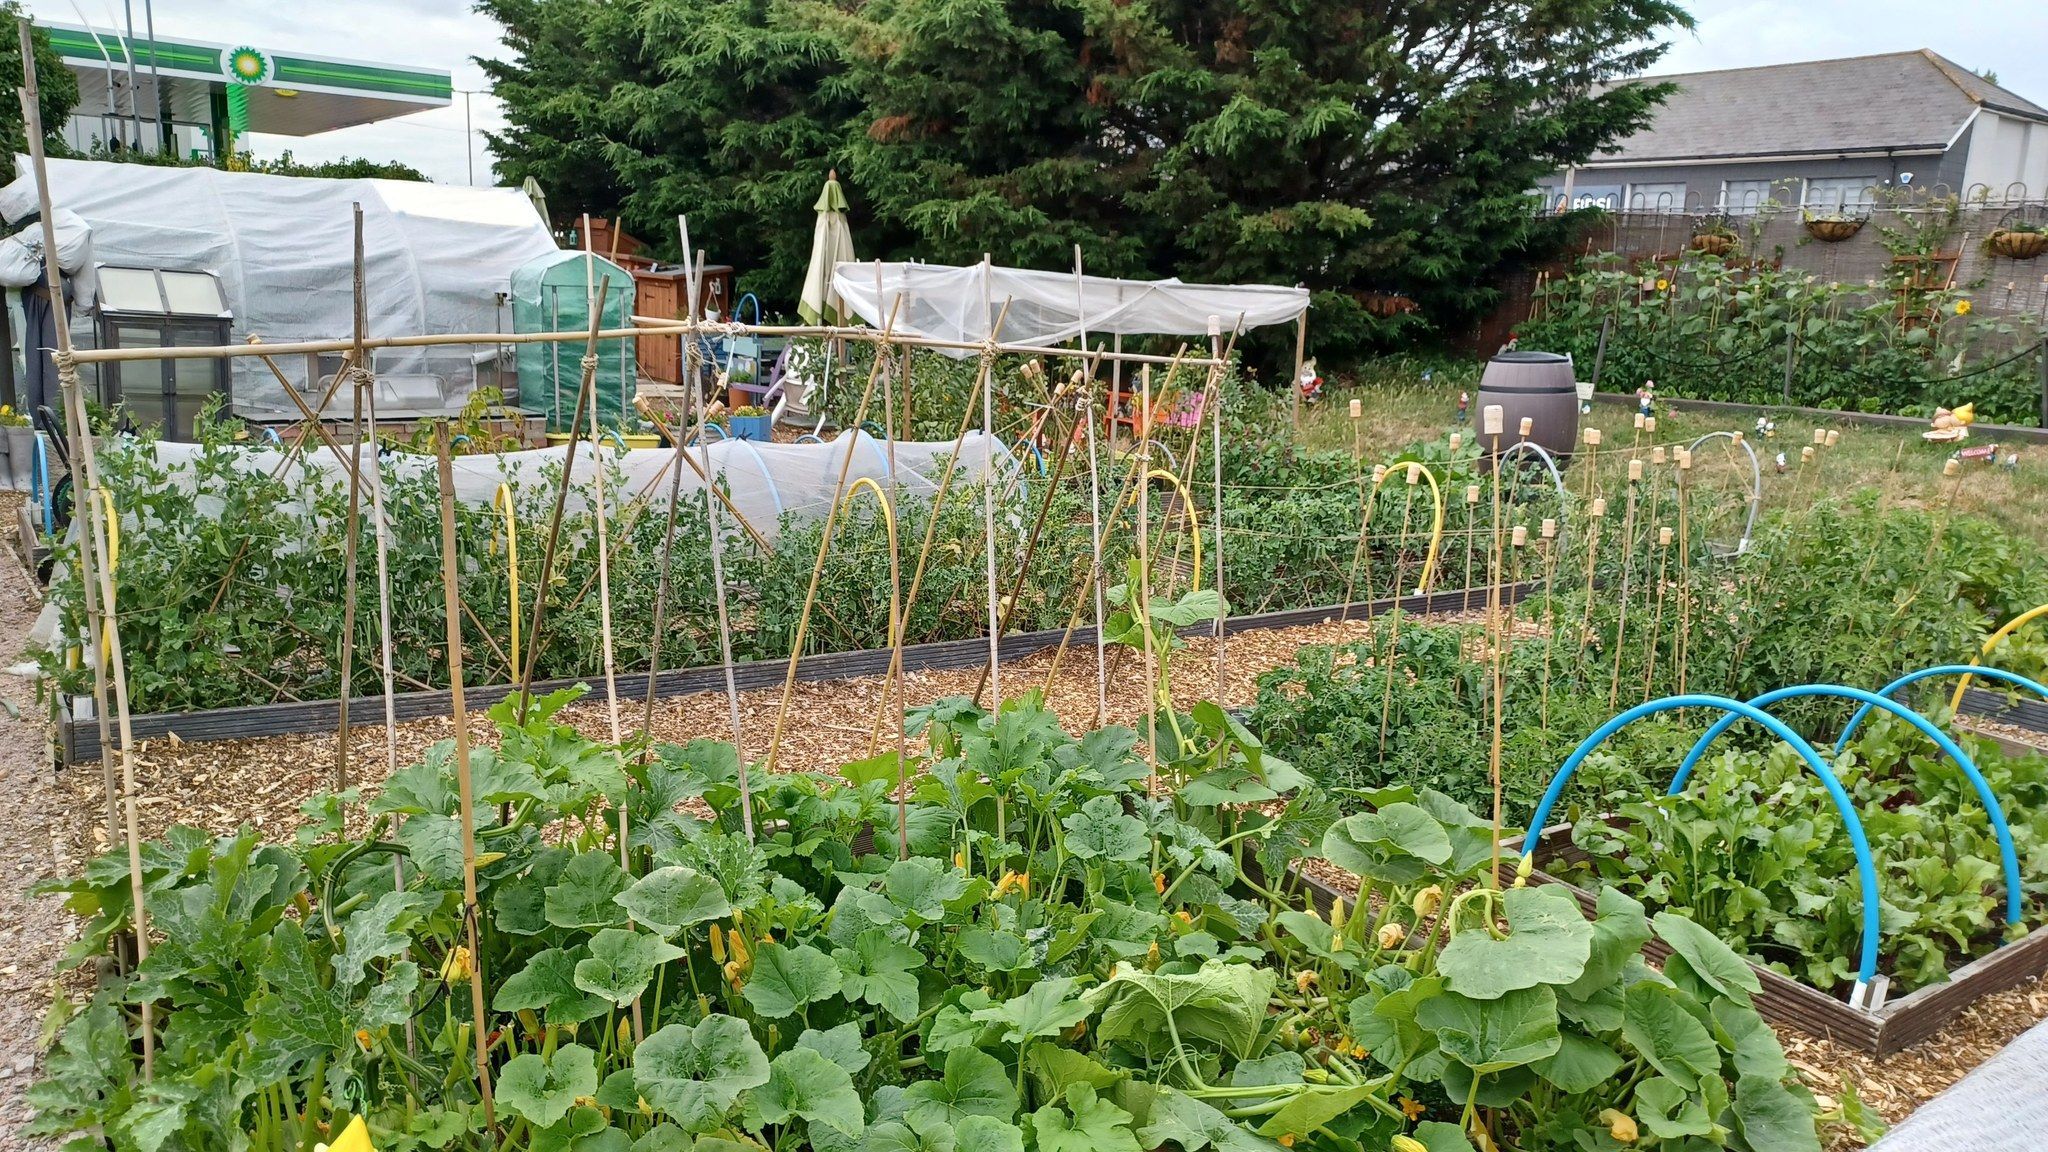 Tracey's community allotment